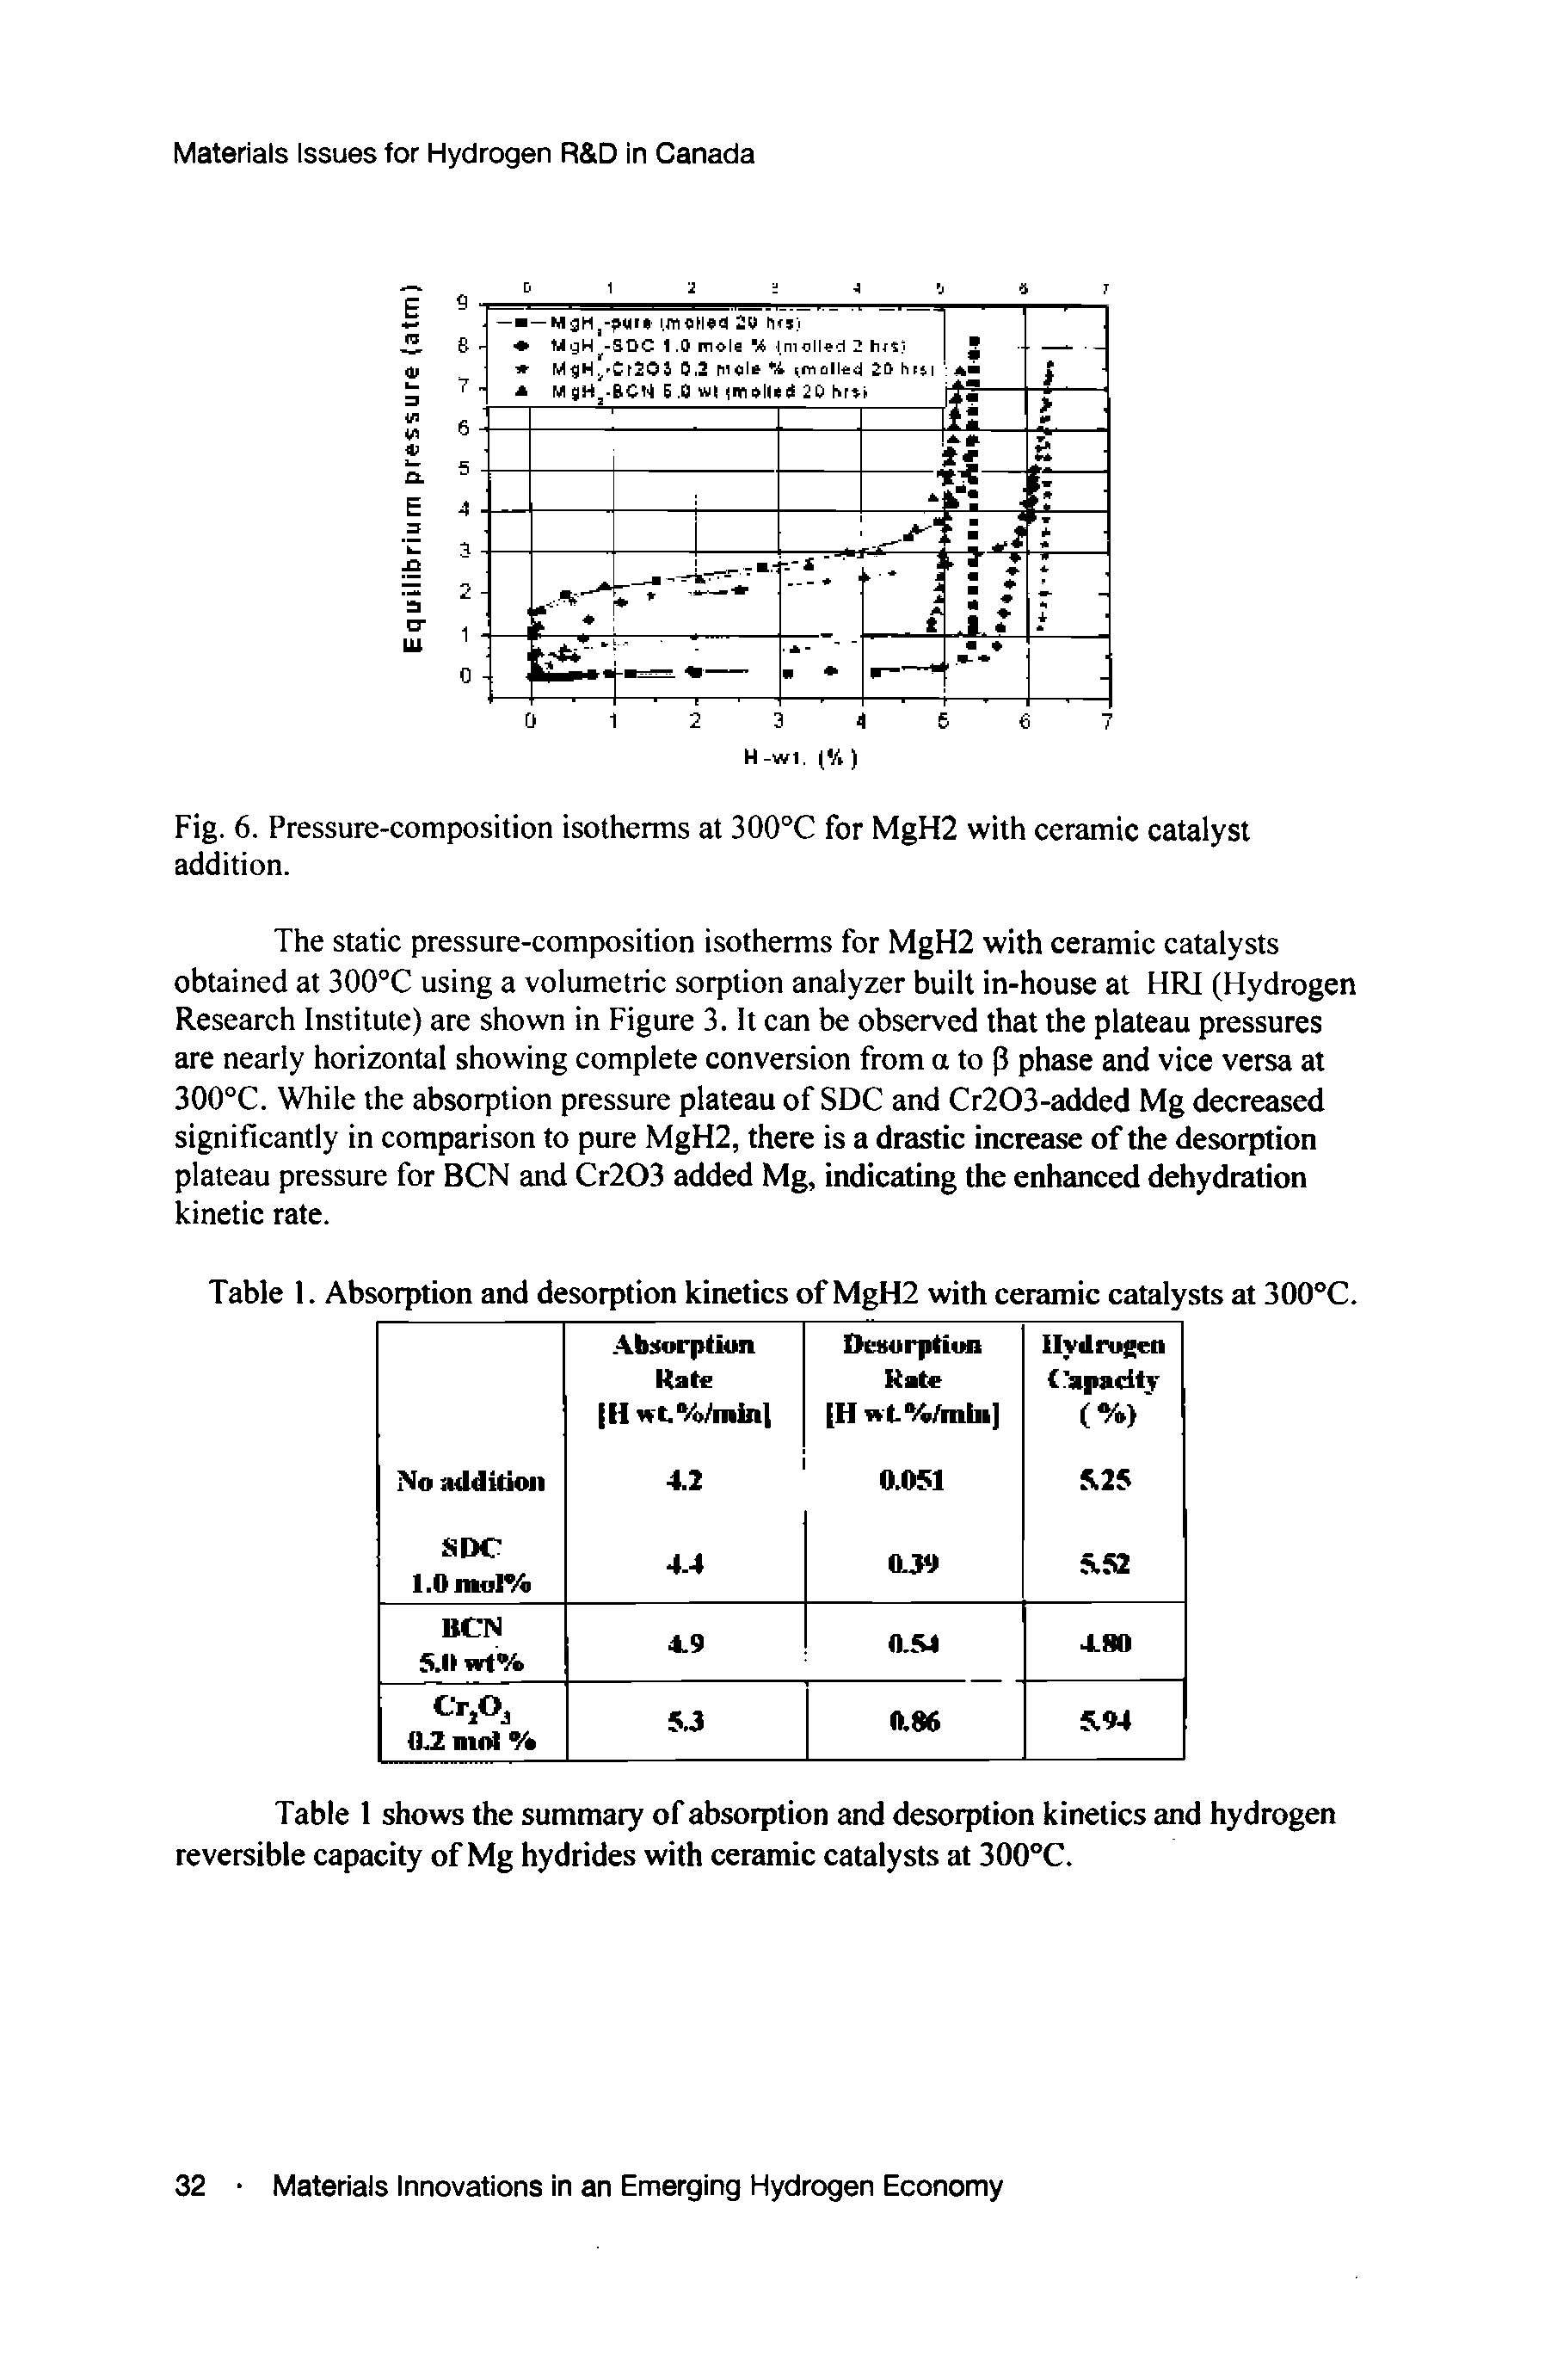 Table 1. Absorption and desorption kinetics of MgH2 with ceramic catalysts at 300°C.